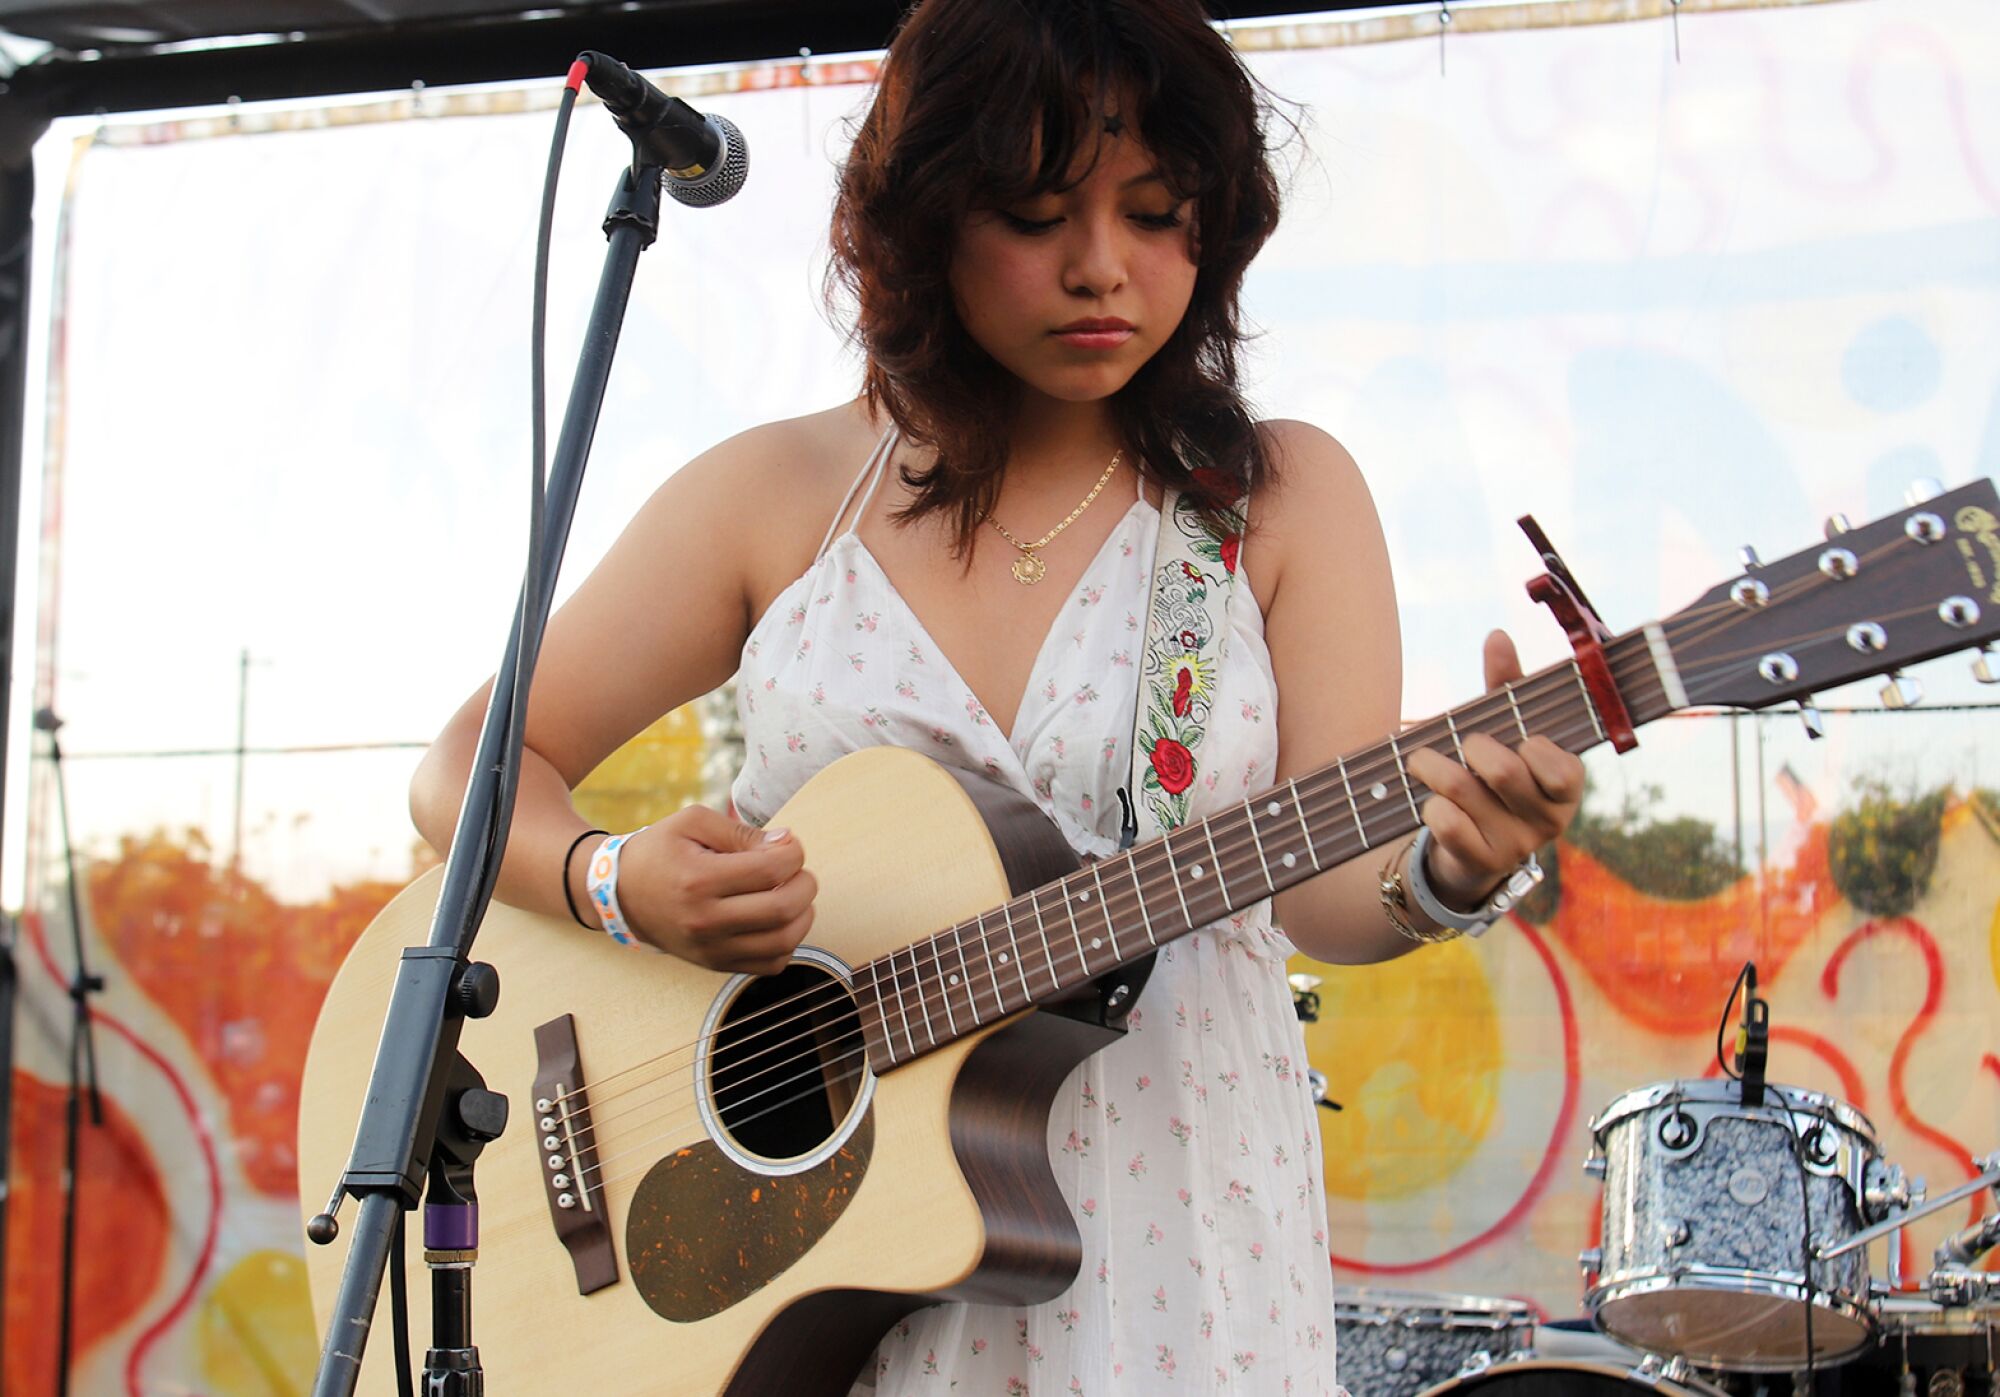 A woman plays an acoustic guitar